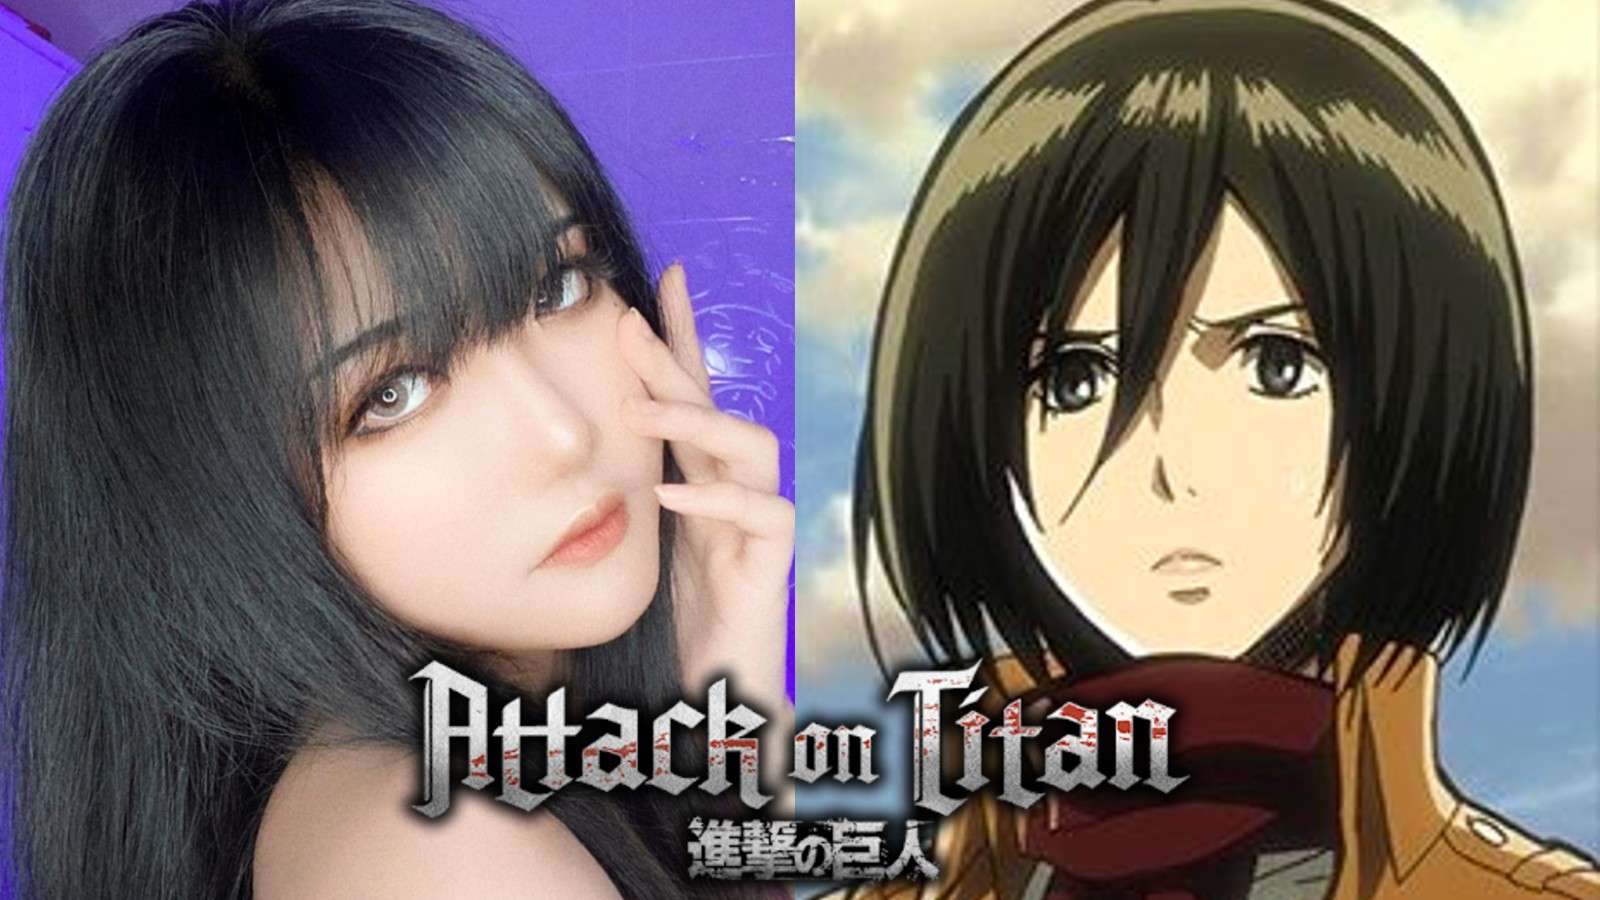 Cosplayer Anongnoon next to Mikasa from Attack On Titan